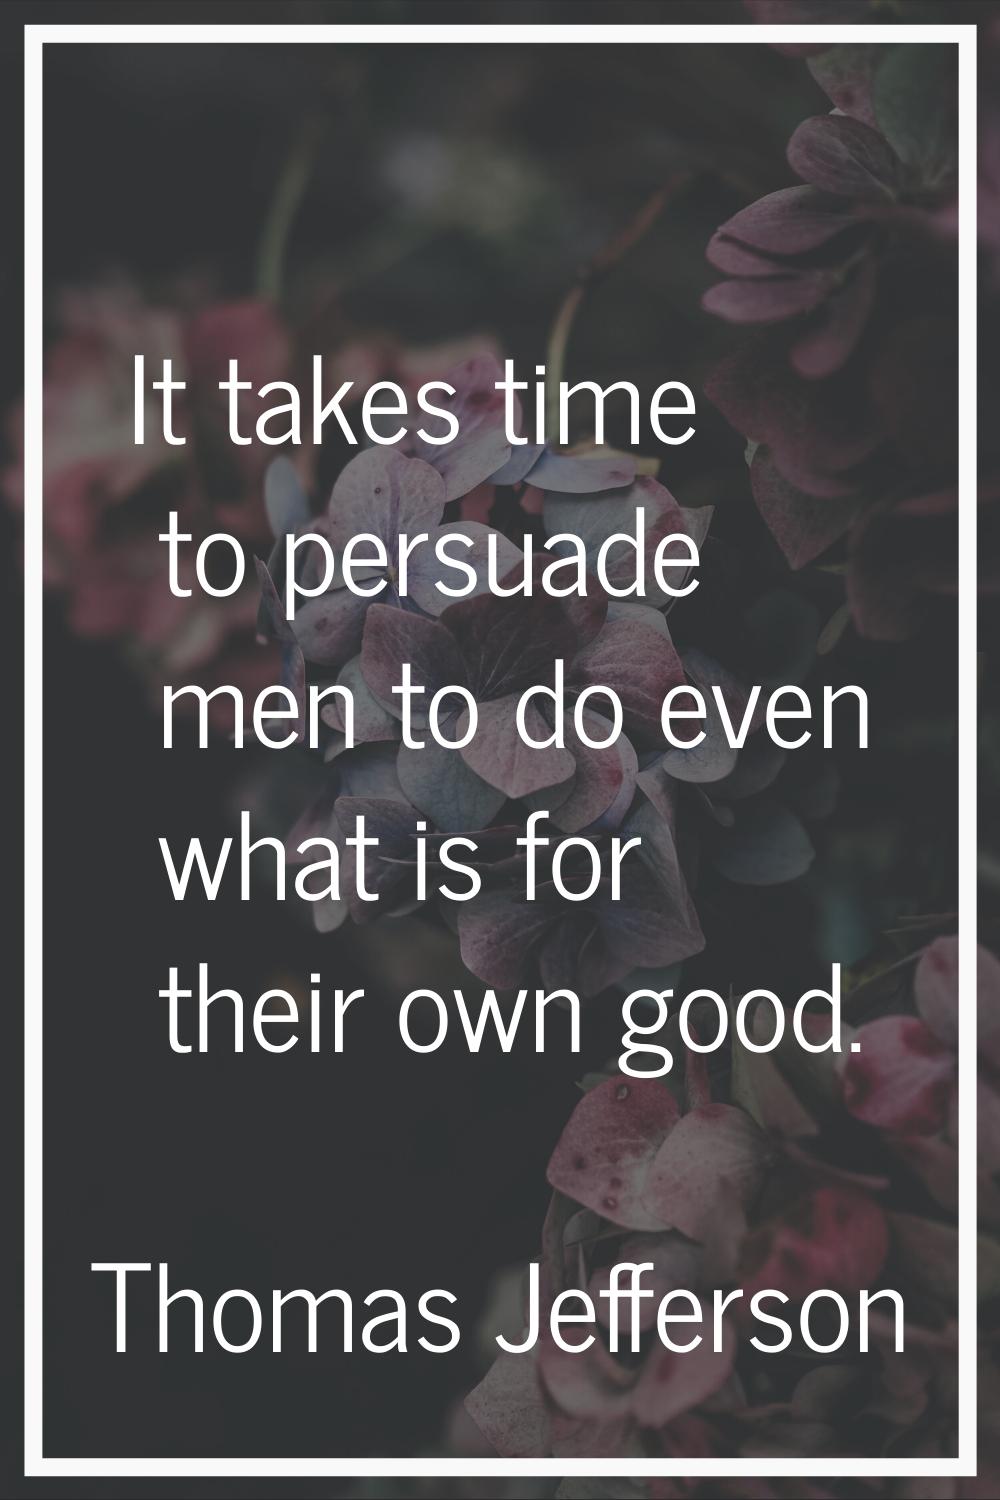 It takes time to persuade men to do even what is for their own good.